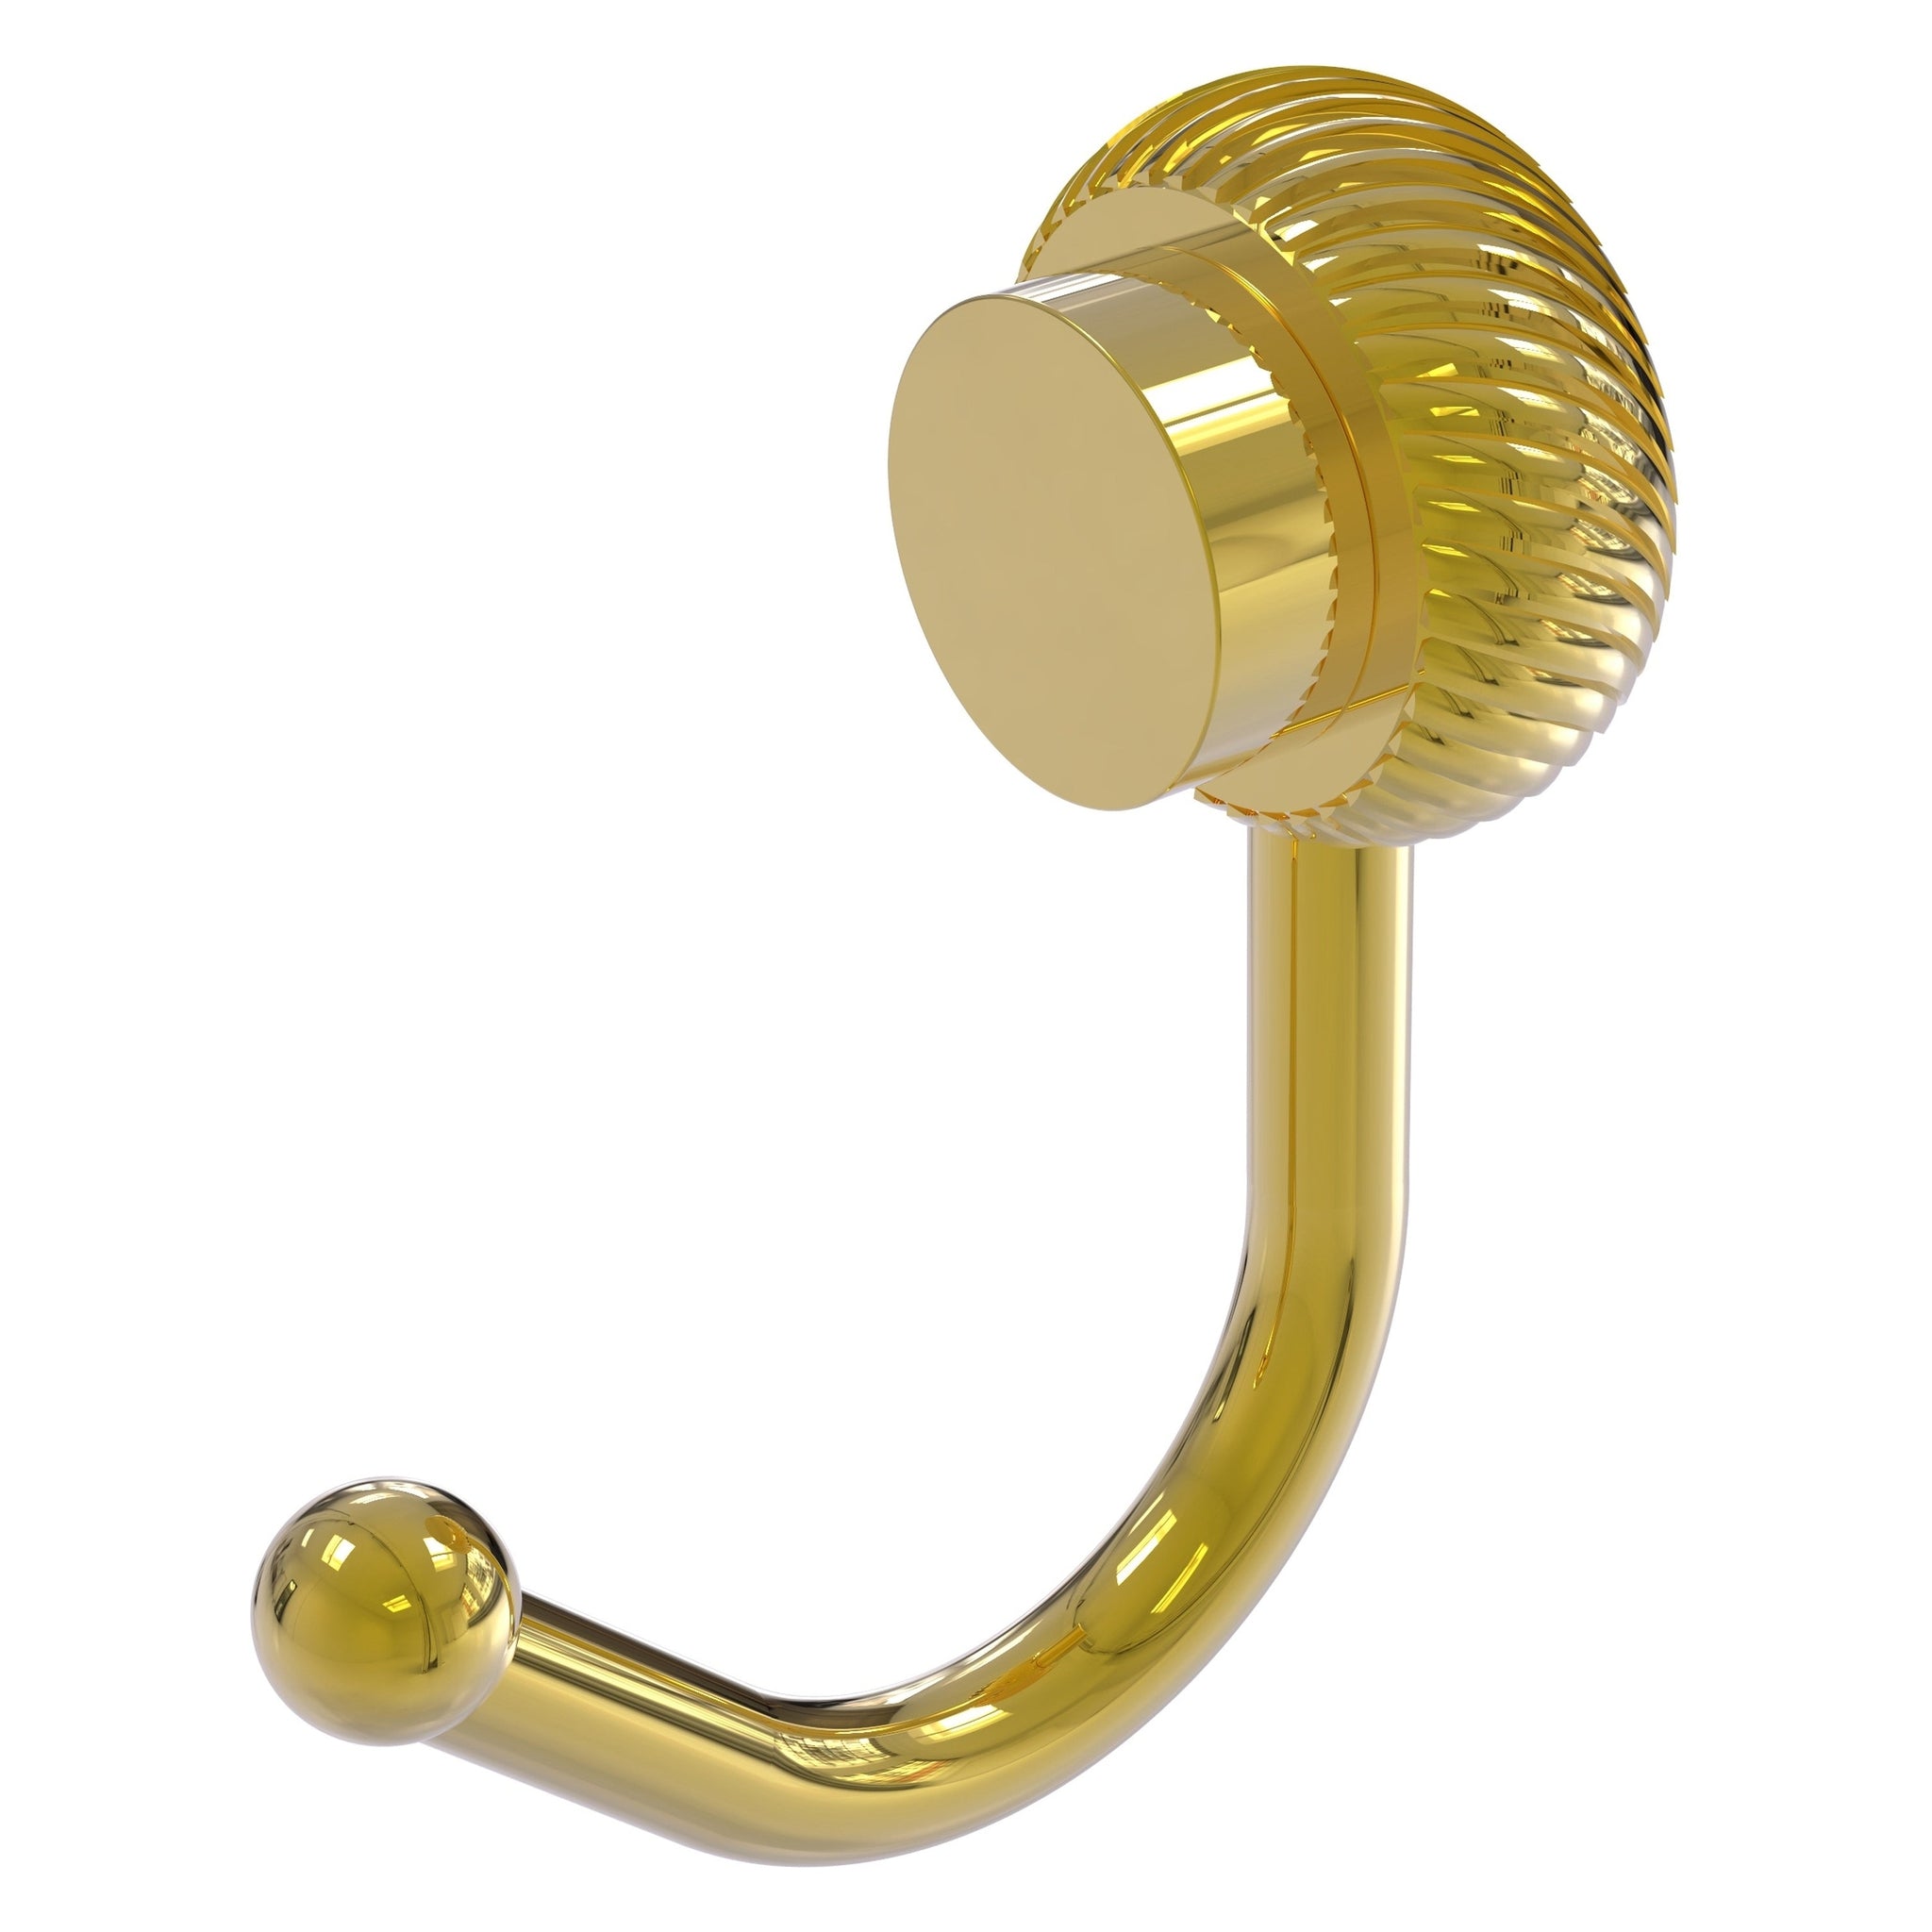 Allied Brass - Foxtrot Collection Robe Hook in Antique Brass